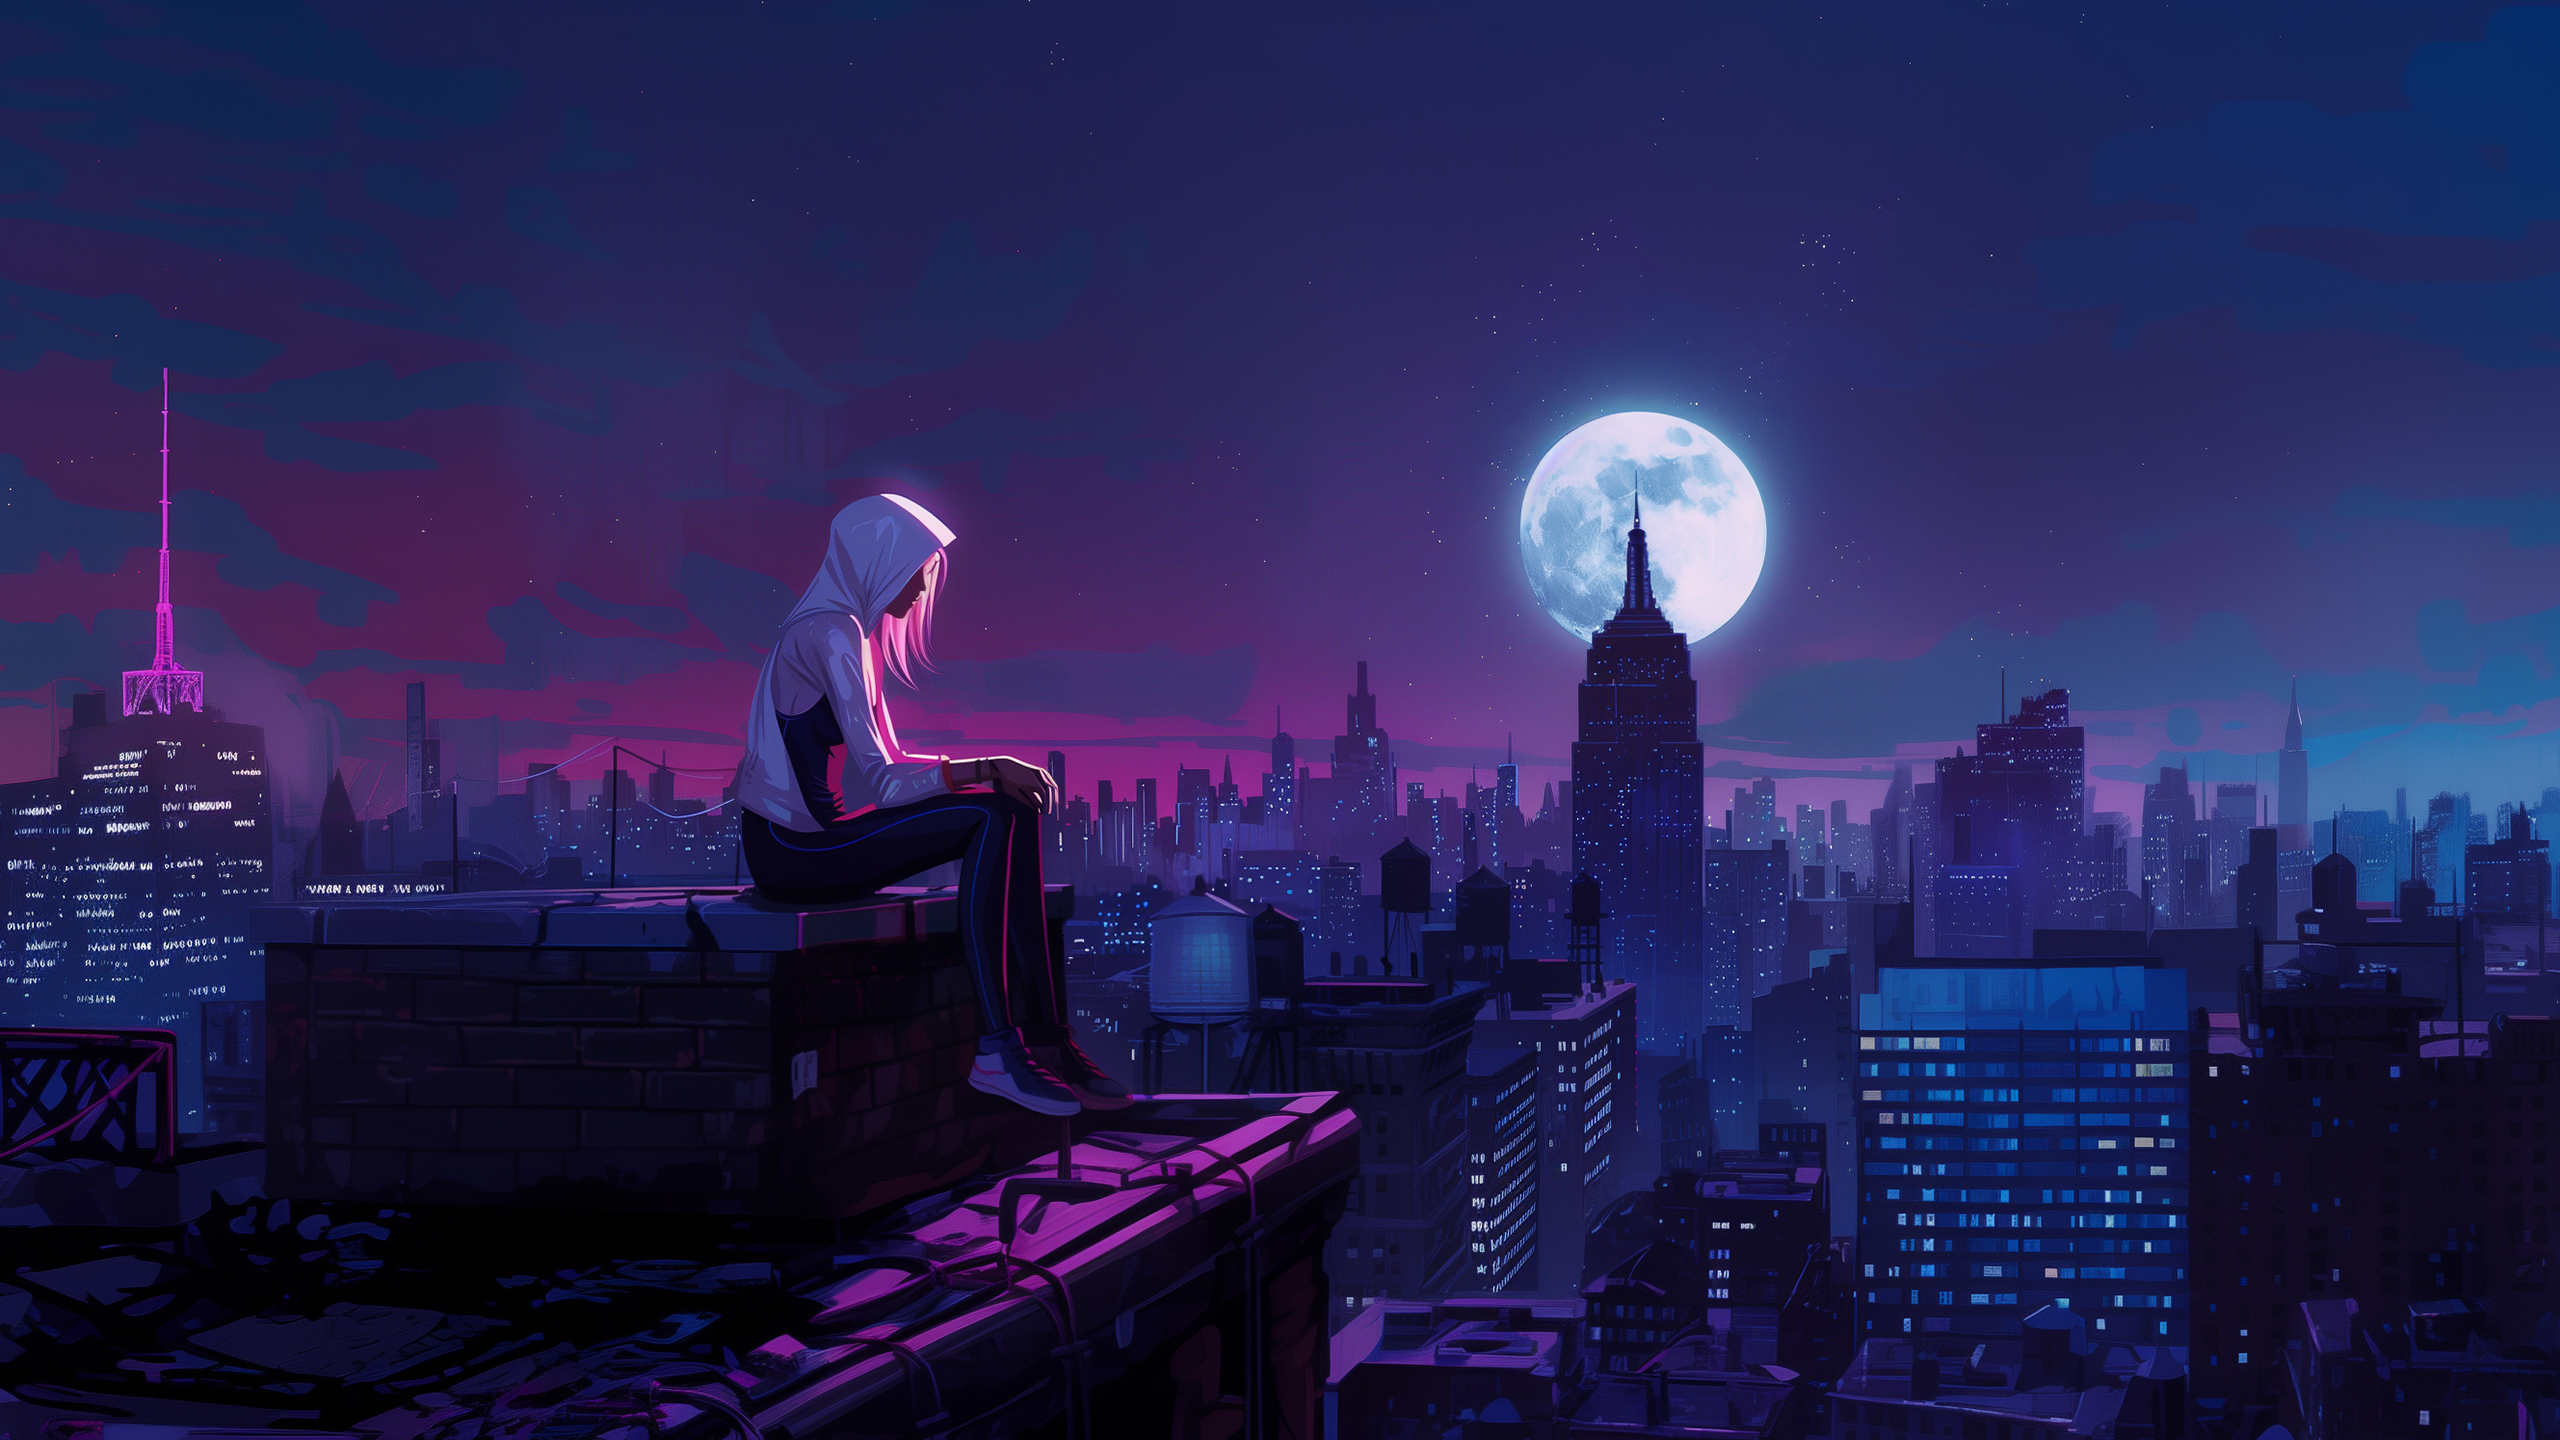 General 2560x1440 spider Spider Gwen moon rays New York City rooftops city lights Marvel Comics Gwen Stacy Spider-Man backlighting AI art